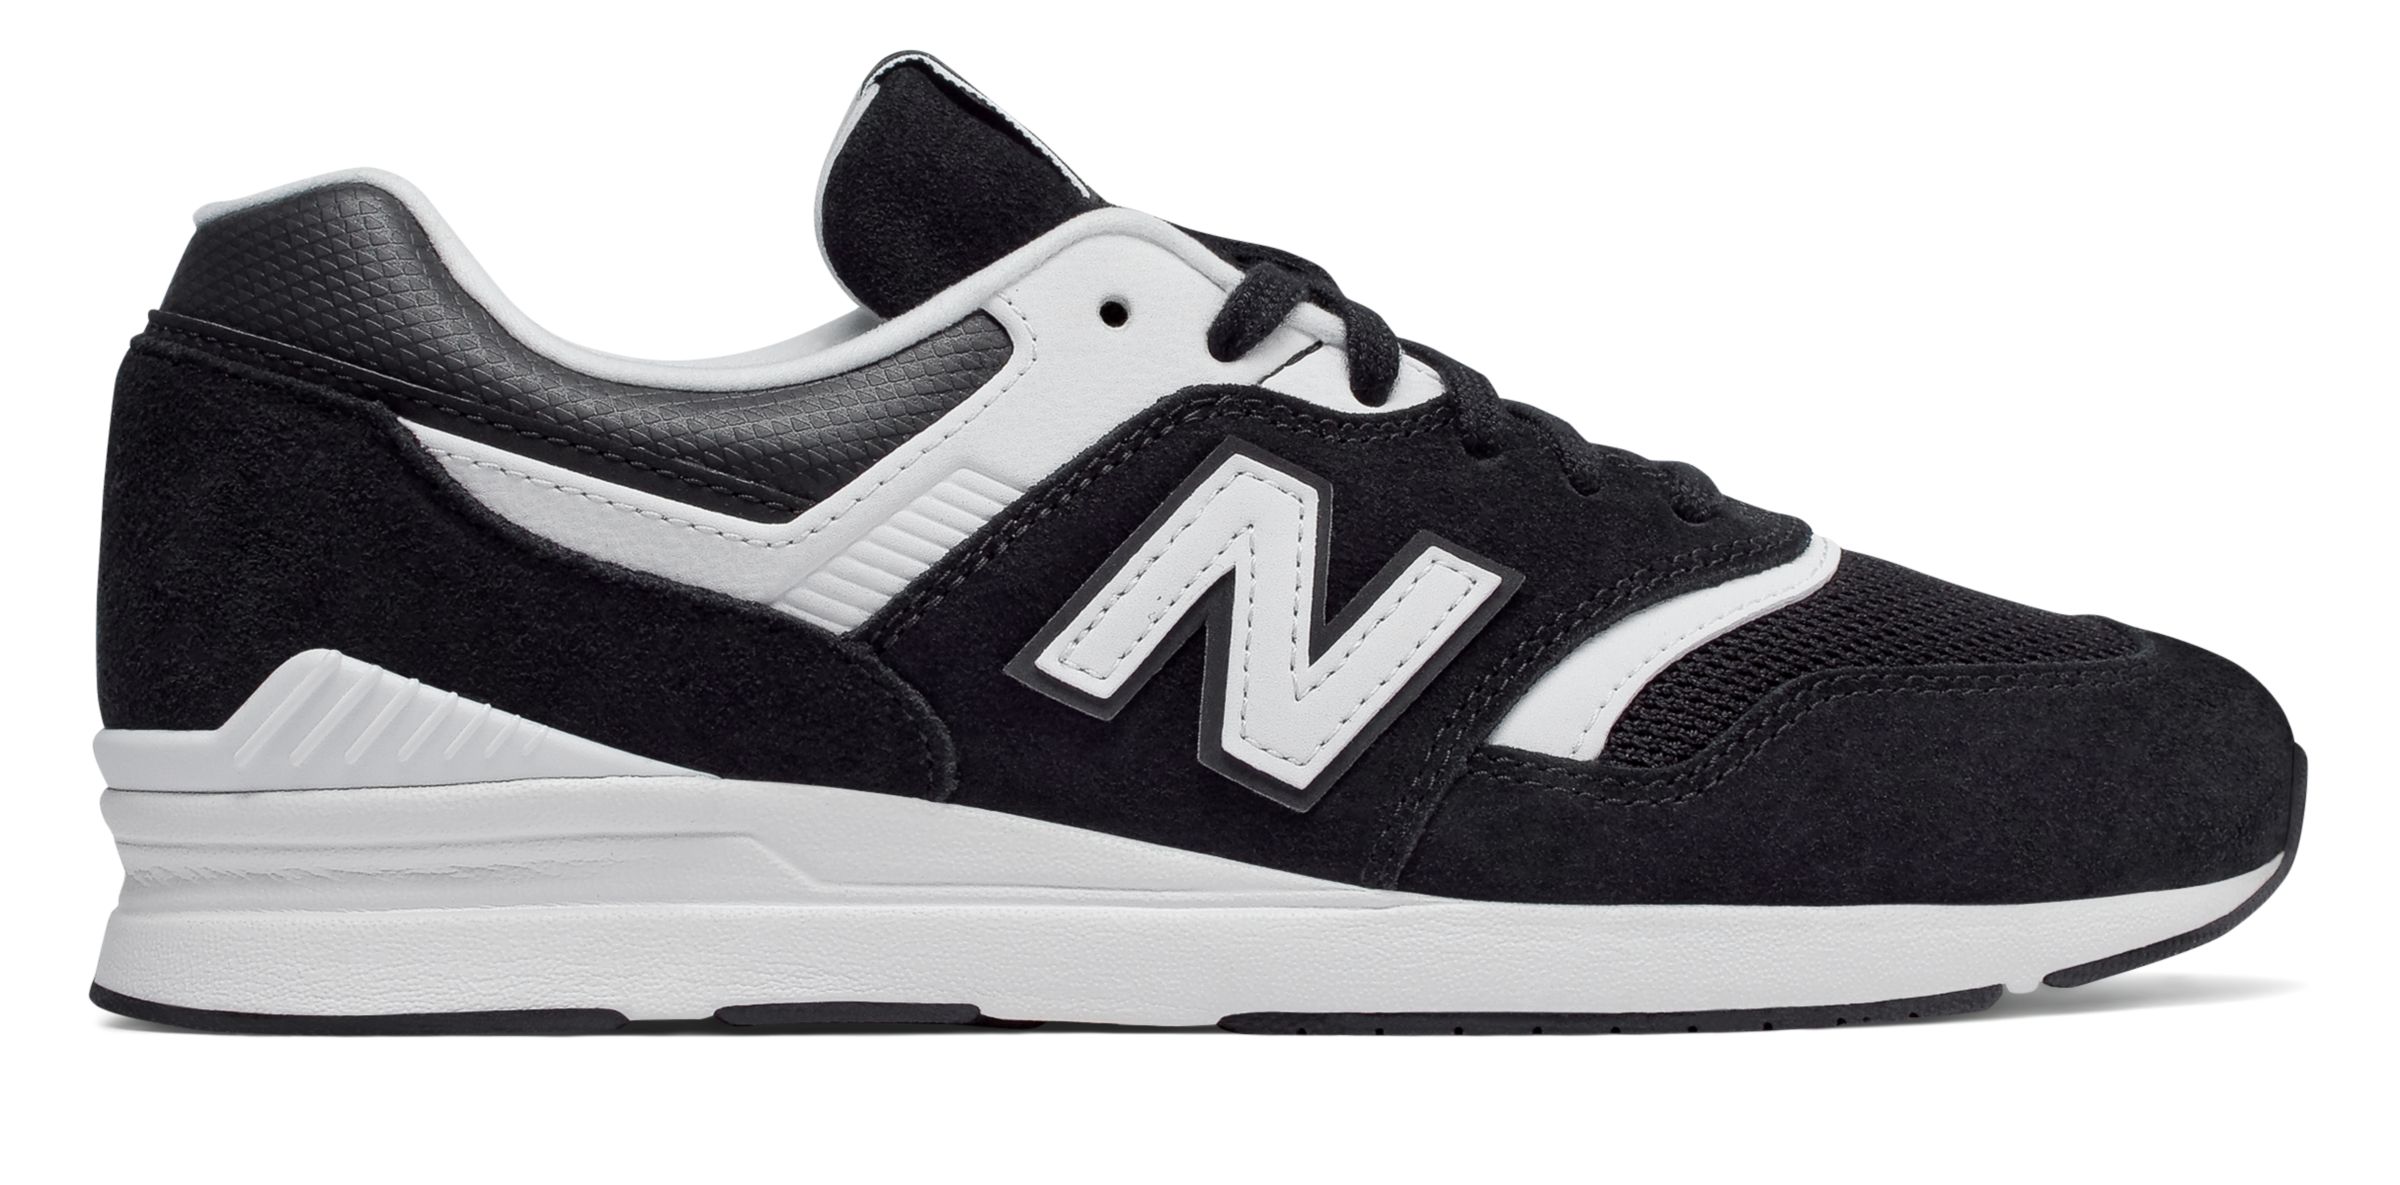 New Balance WL697-LE on Sale - Discounts Up to 54% Off on WL697CA at Joe's  New Balance Outlet